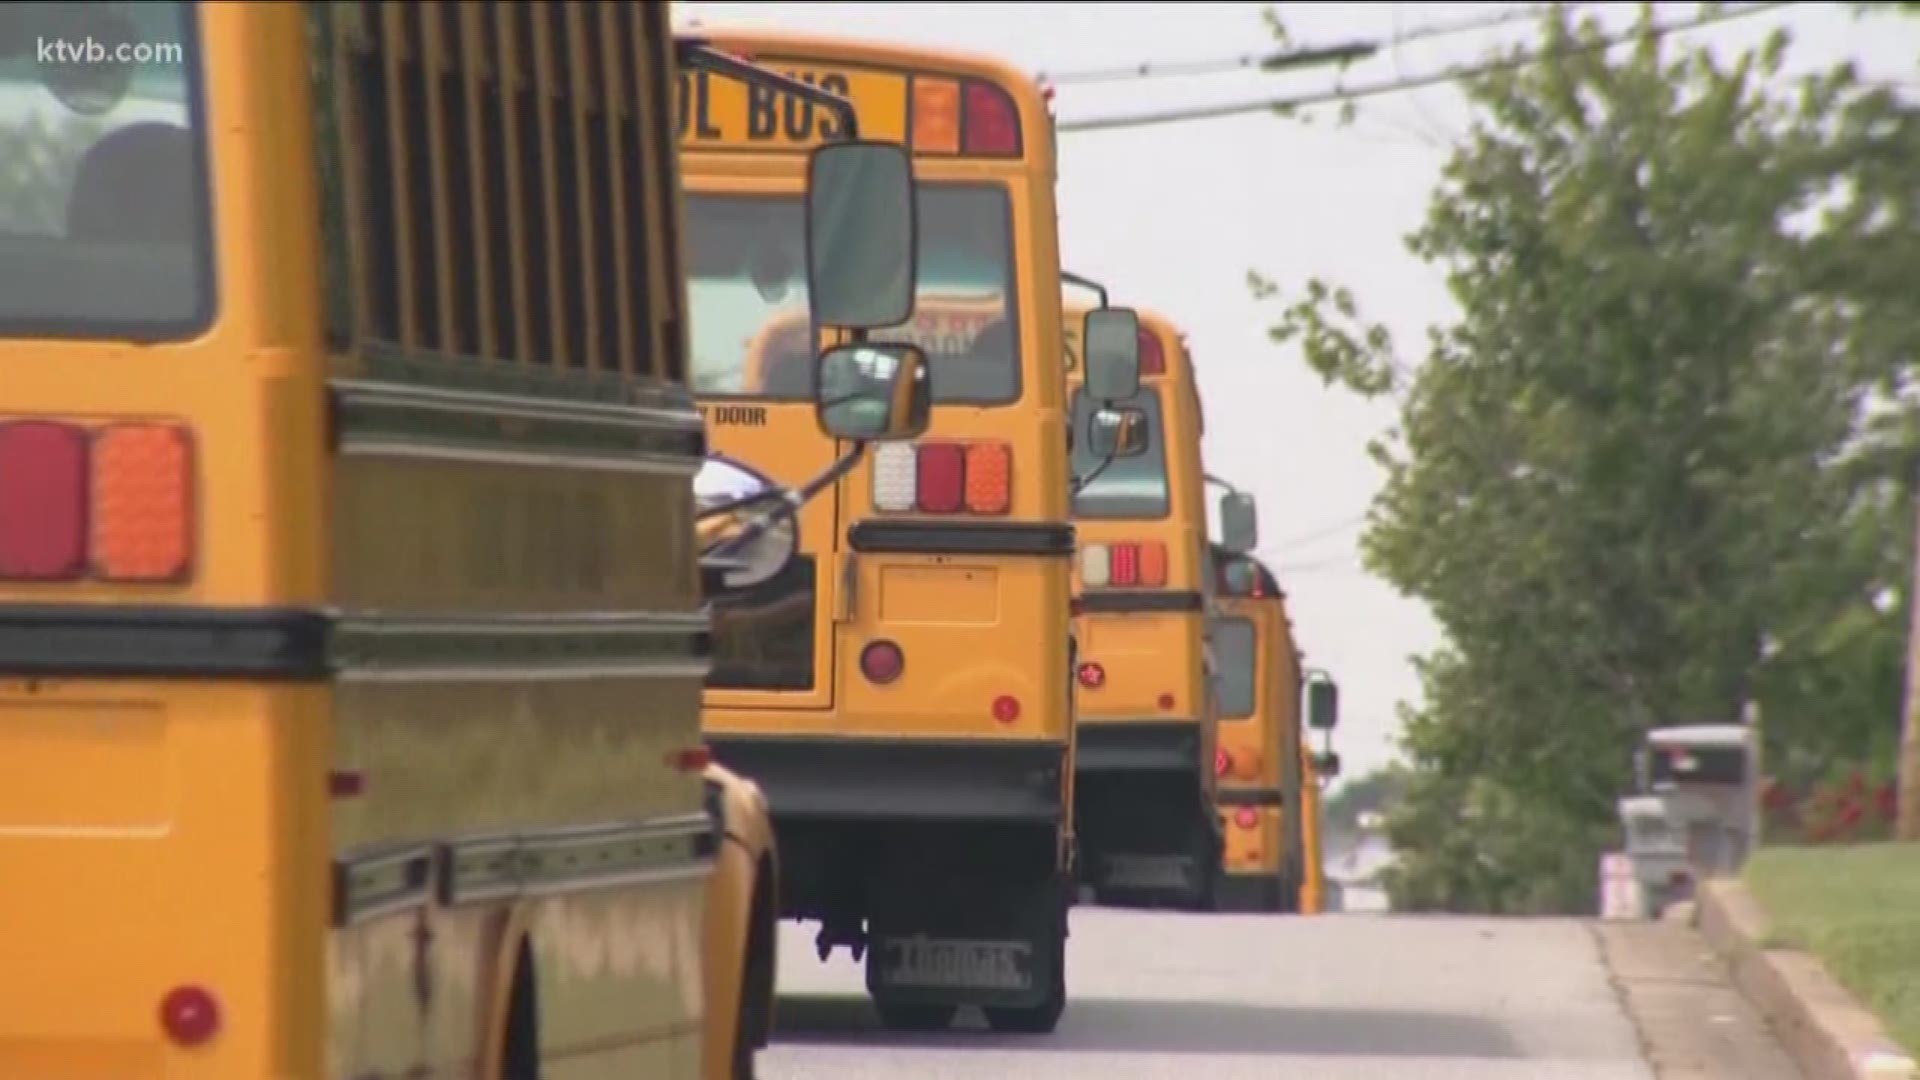 The company develop an app that helps parents know where school buses are in real time.